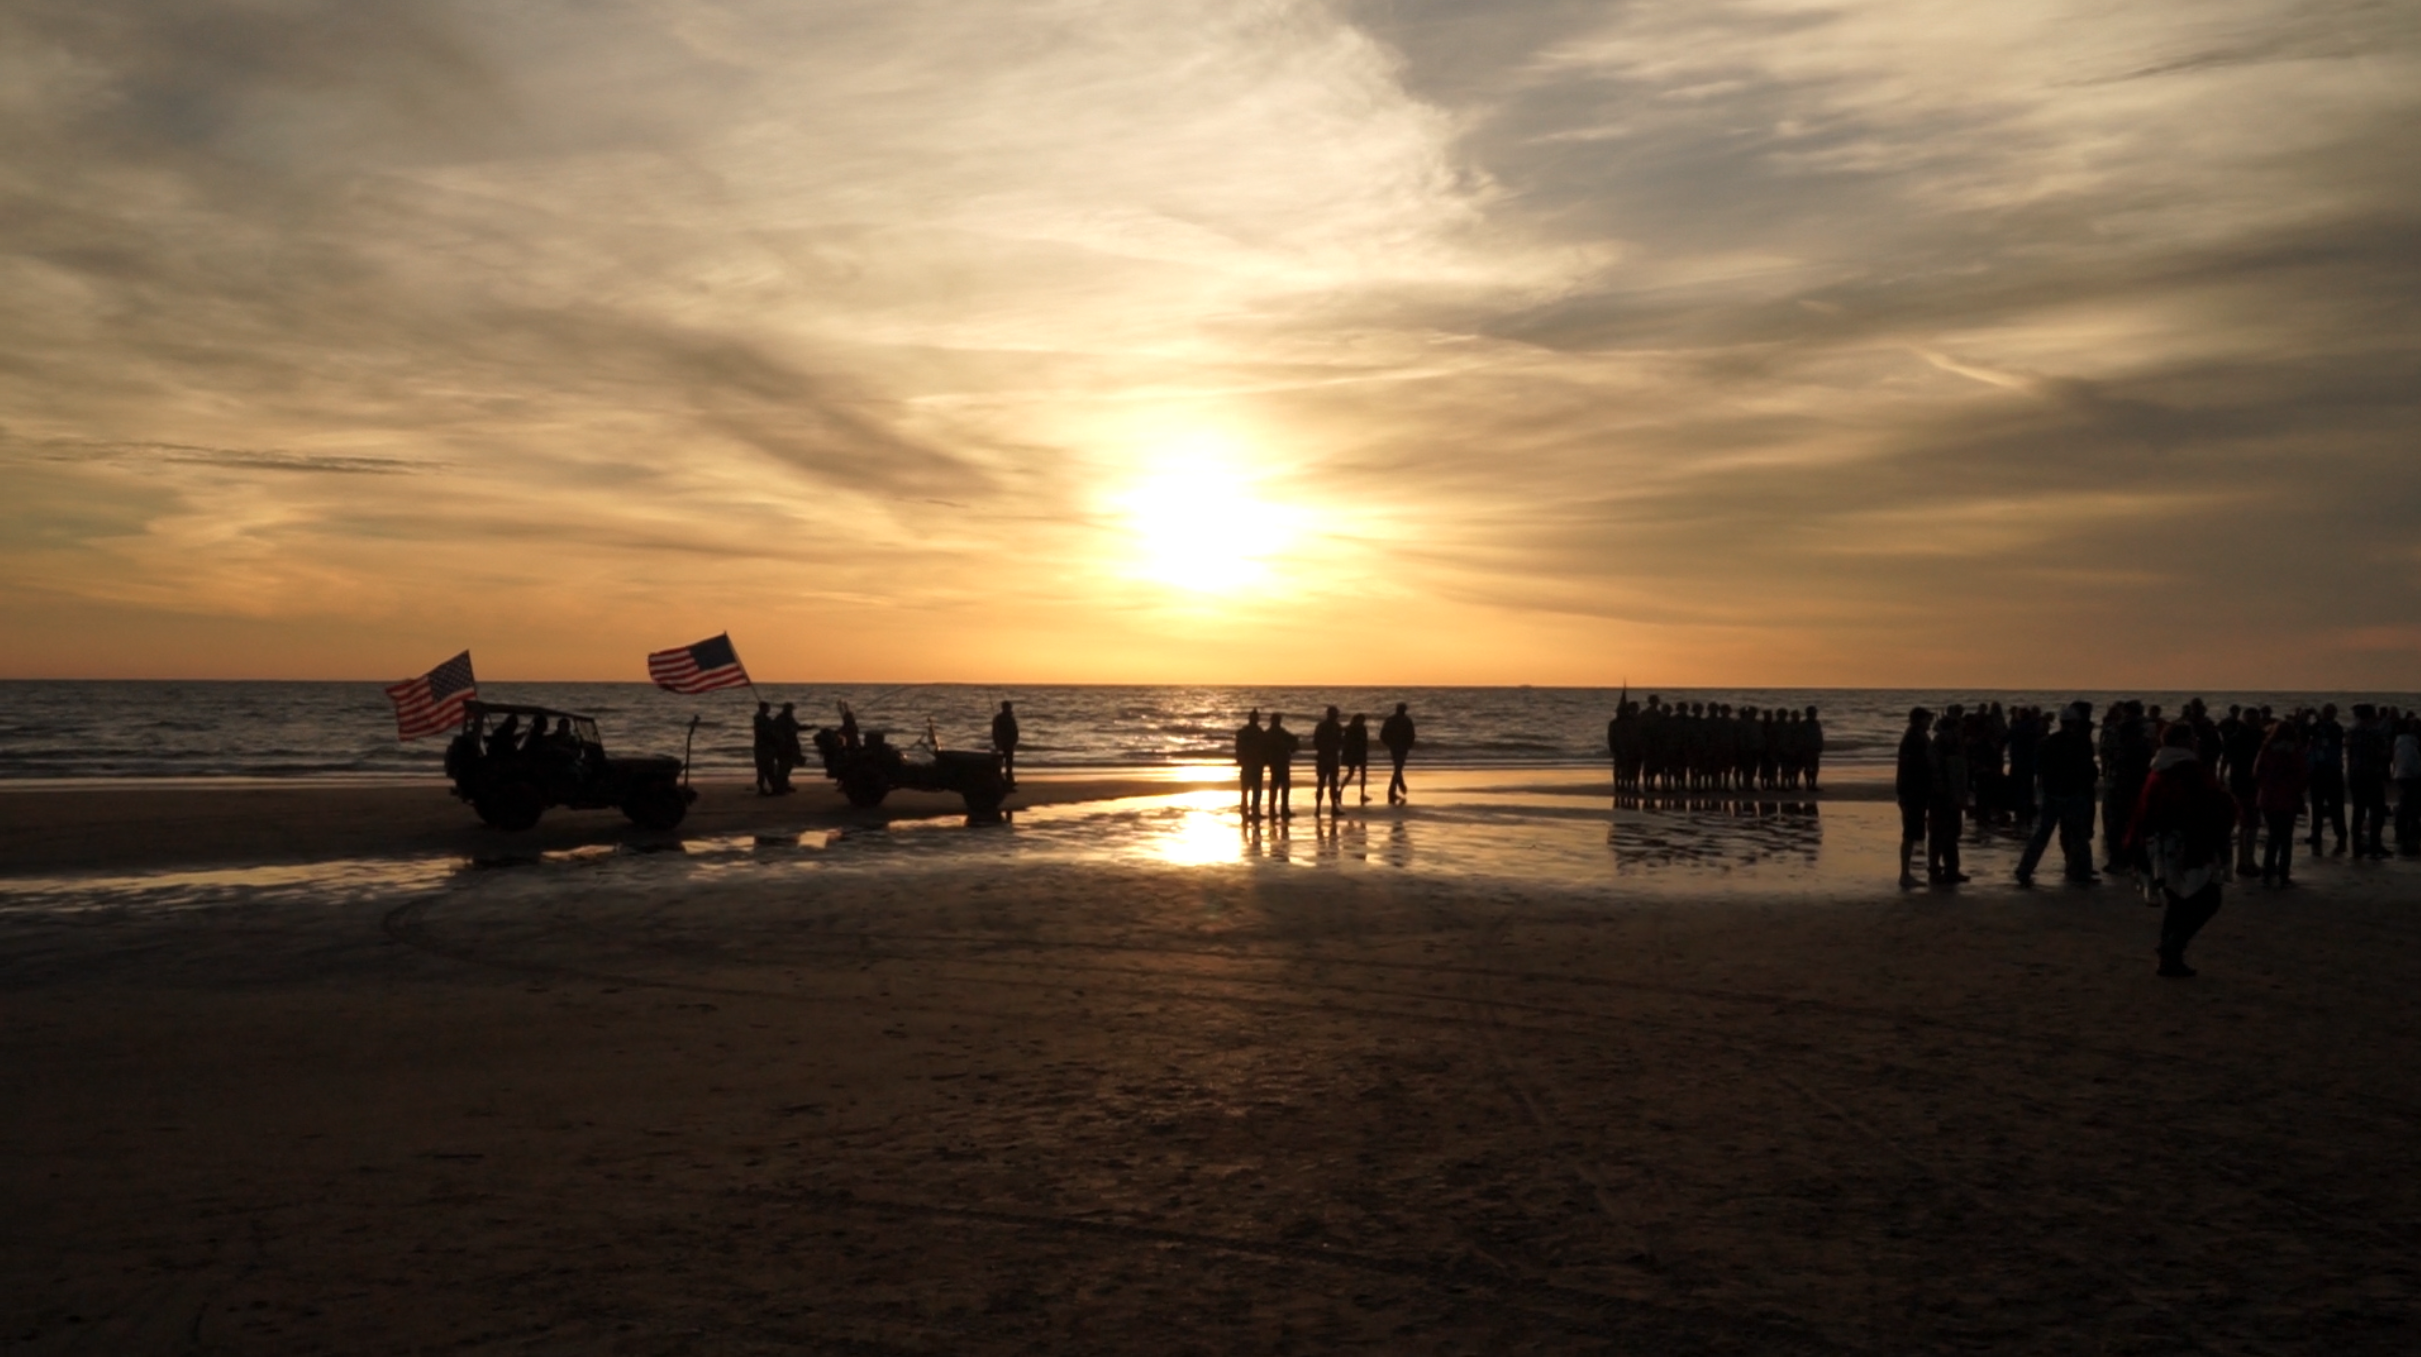  Soldiers and reenactors gather on Omaha Beach for a dawn ceremony commemorating D-Day’s anniversary. 